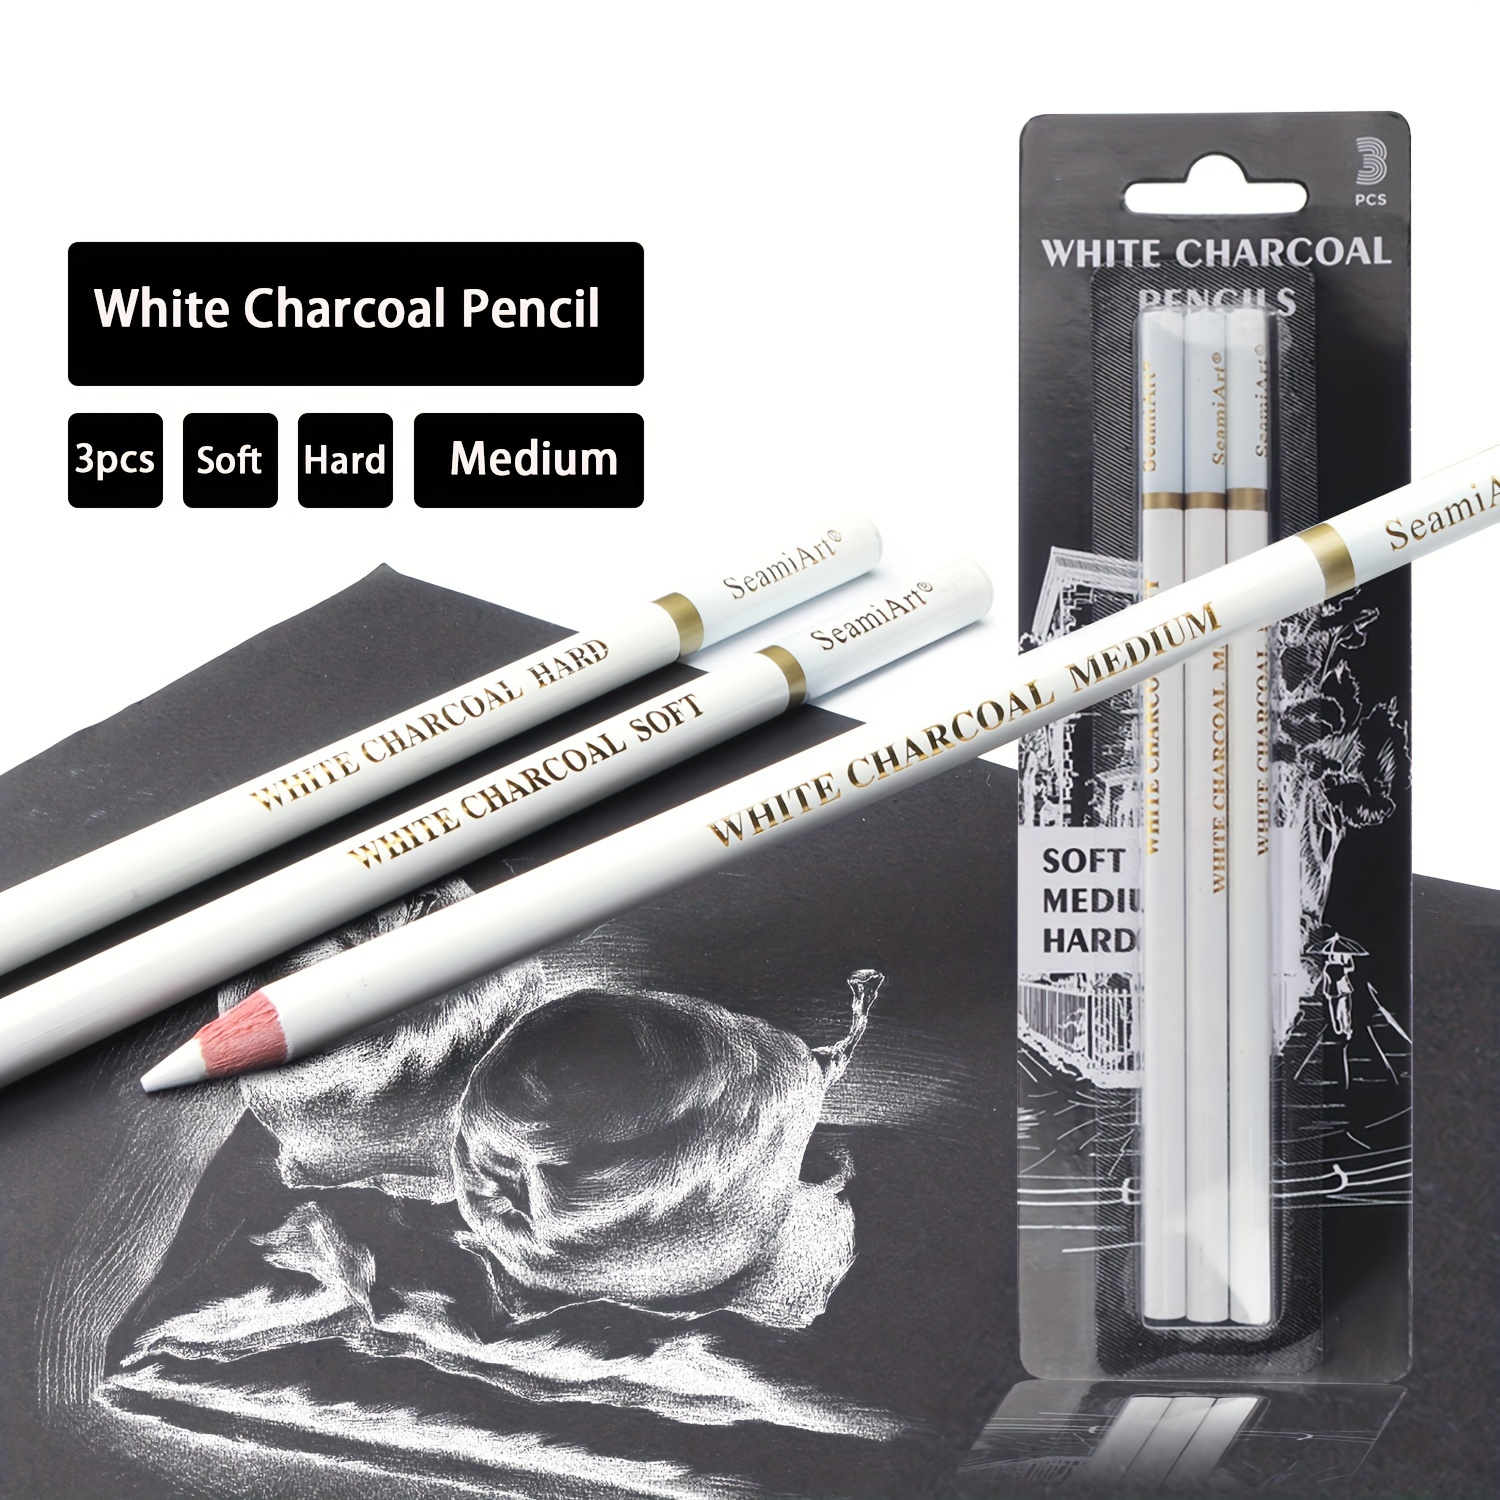  PENINSULA LOVE 12pcs White Charcoal Pencils Sketch Highlight  Pencil HB Charcoal Drawing Set White Chalk Pencil for Artists Professionals  Beginners Drawing Sketching Shading Blending : Arts, Crafts & Sewing